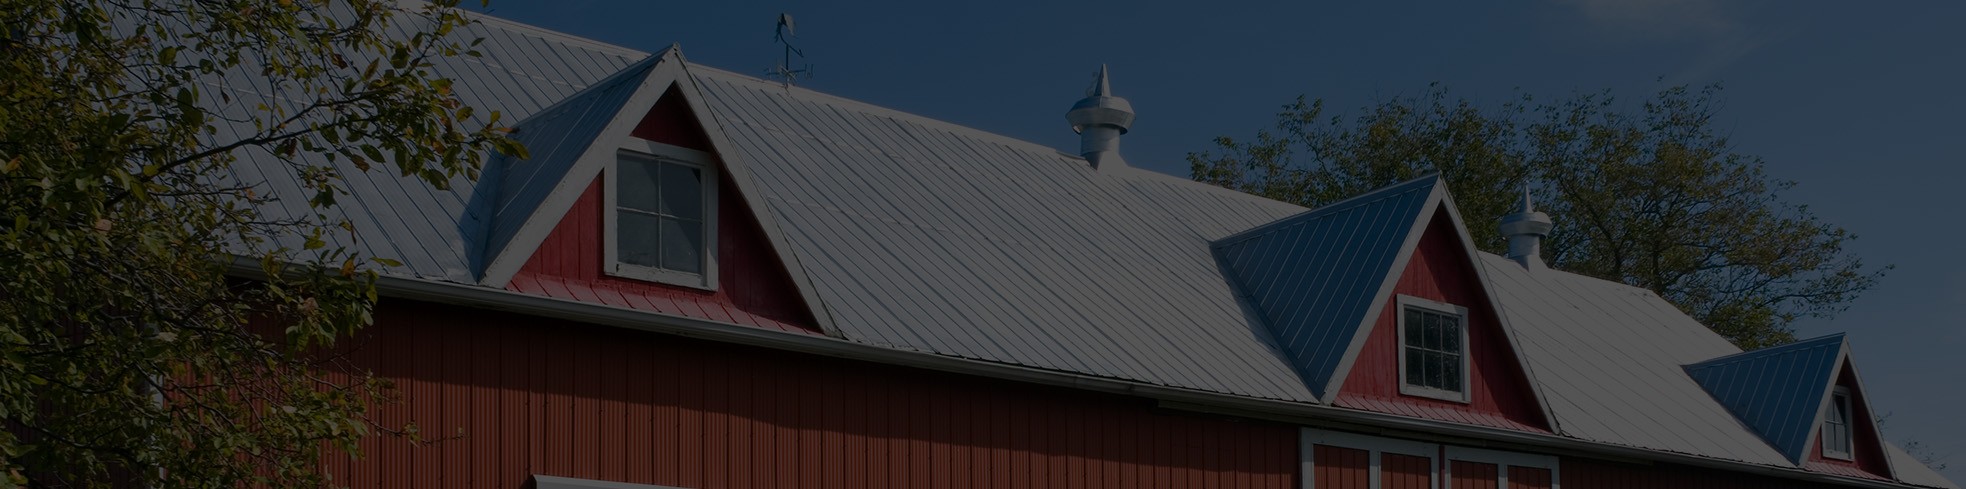 Milwaukee roofing service materials, galavalume